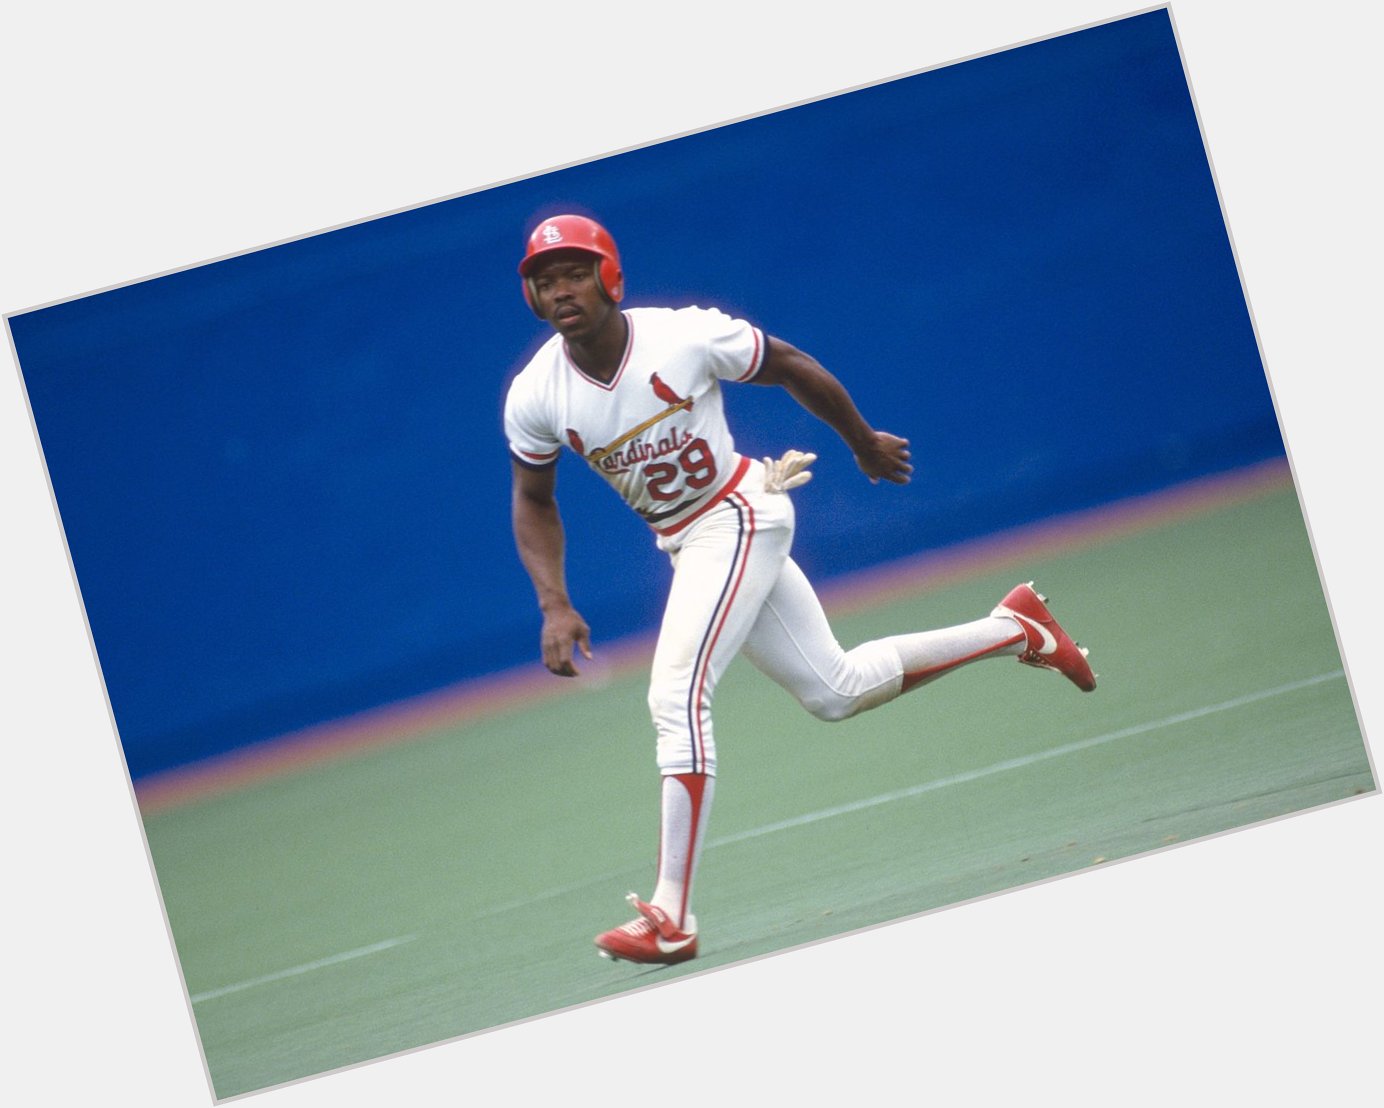 Happy birthday to 1985 NL Rookie of the Year, Vince Coleman 